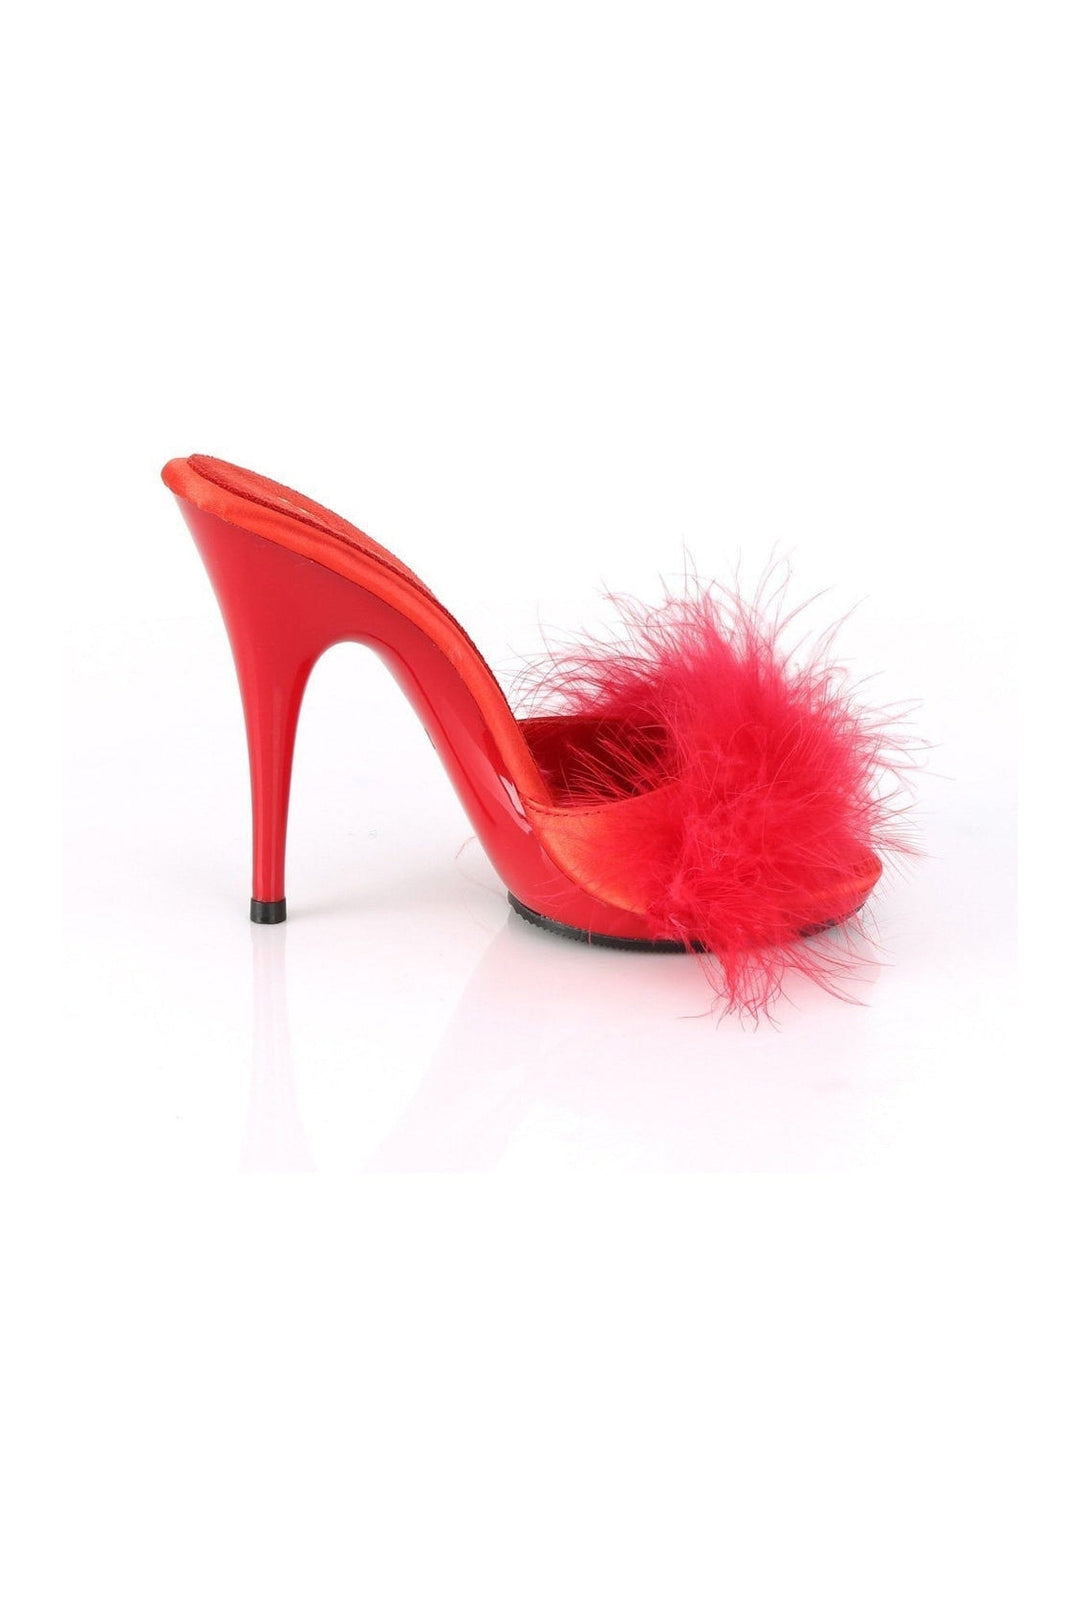 POISE-501F Slide | Red Marabou-Slides-Fabulicious-SEXYSHOES.COM